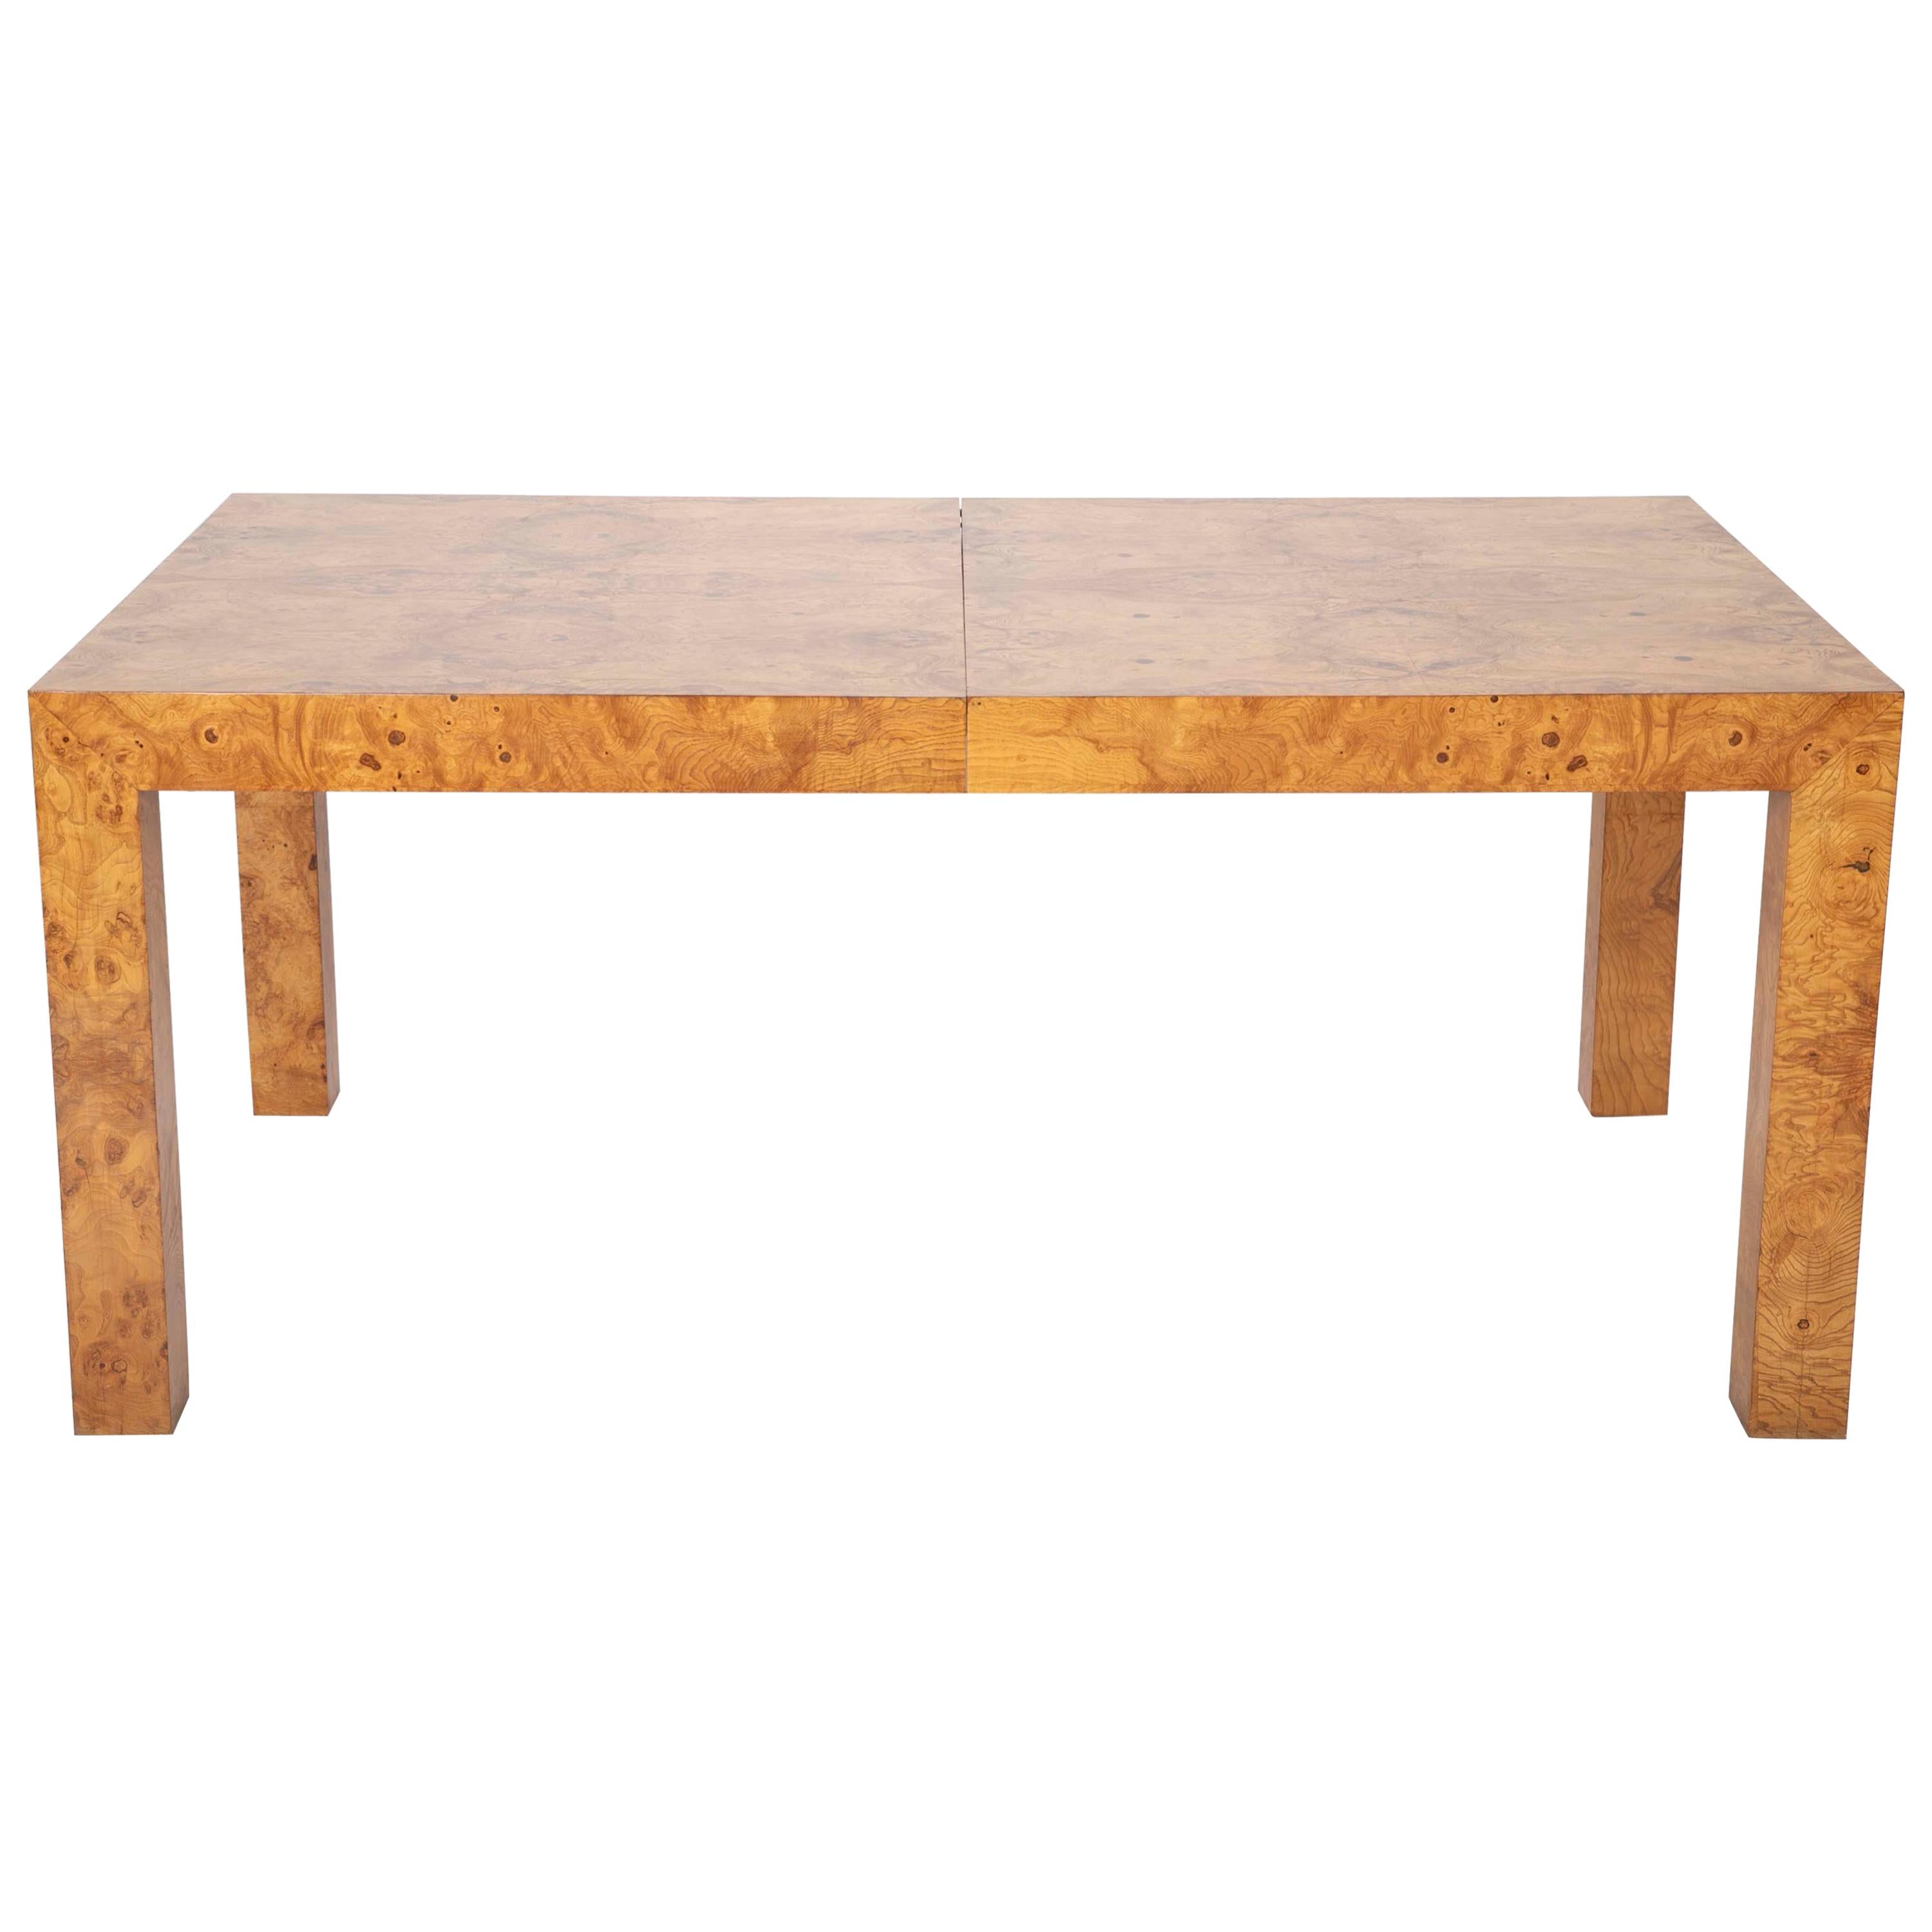 Parsons Style Olivewood Dining Table Design Attributed to Milo Baughman